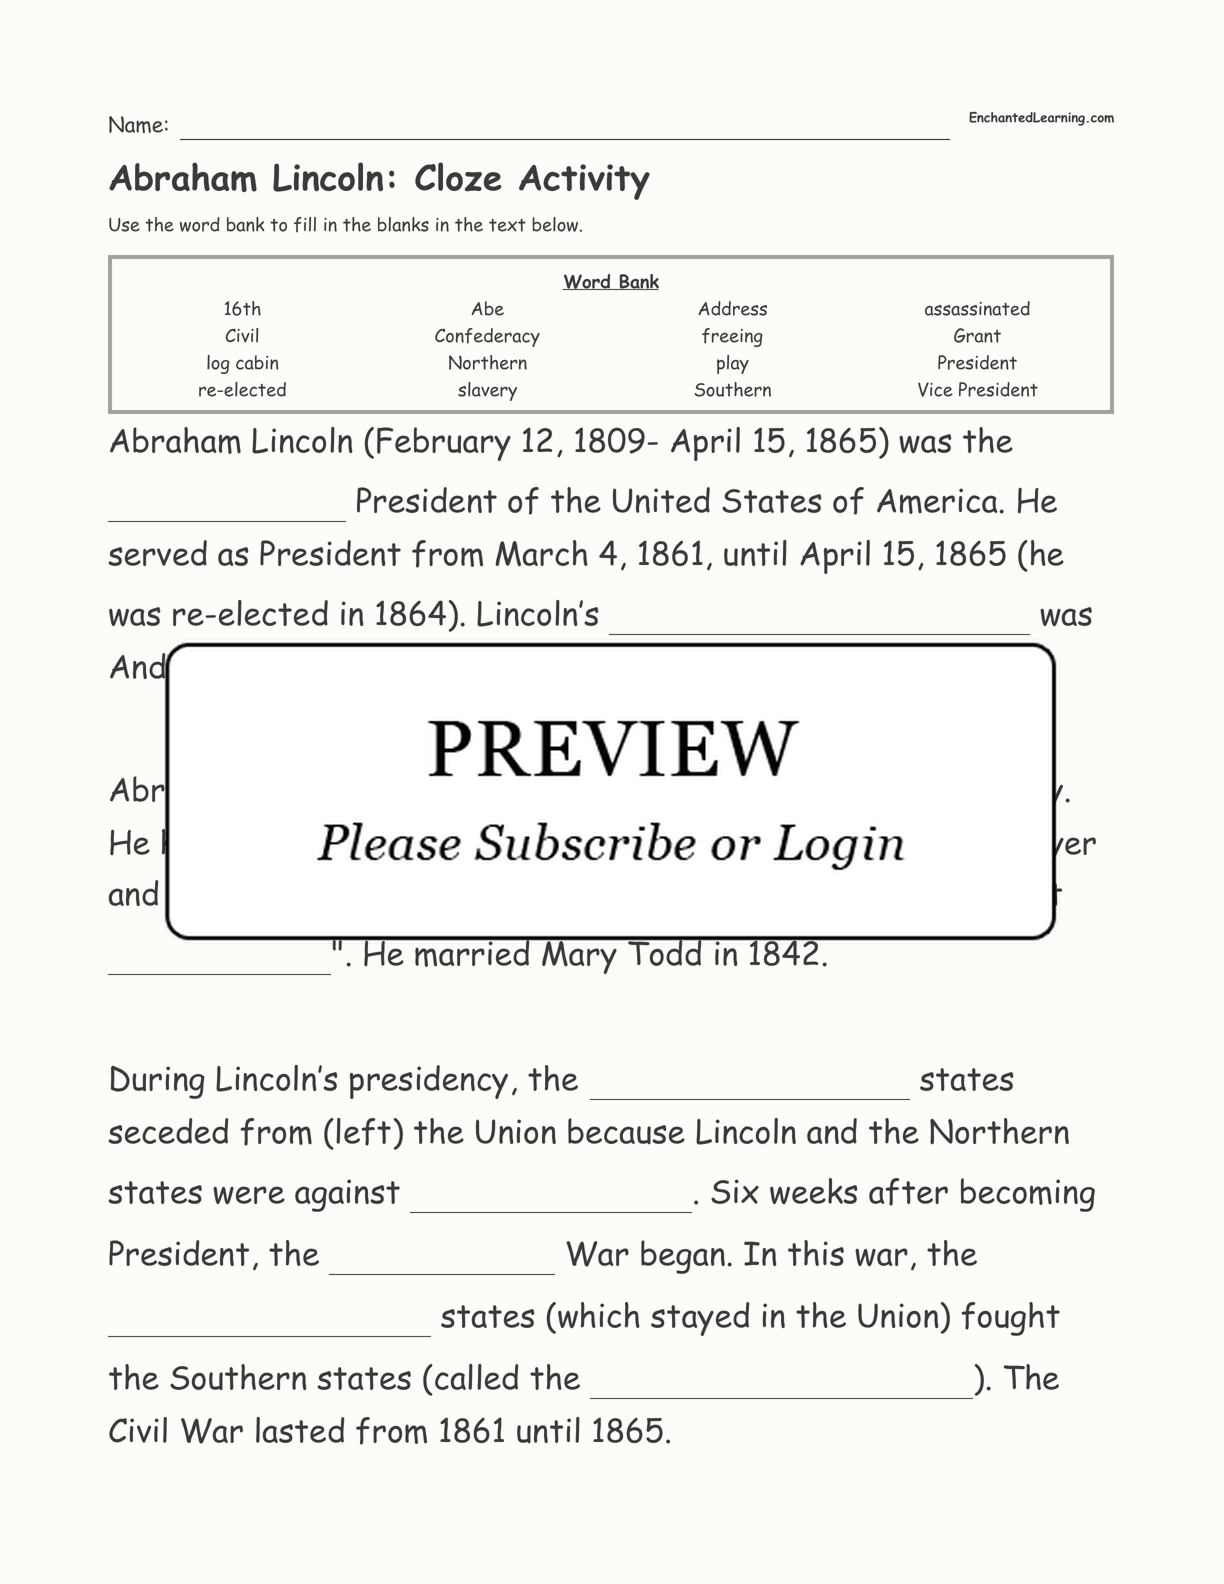 Abraham Lincoln: Cloze Activity interactive worksheet page 1